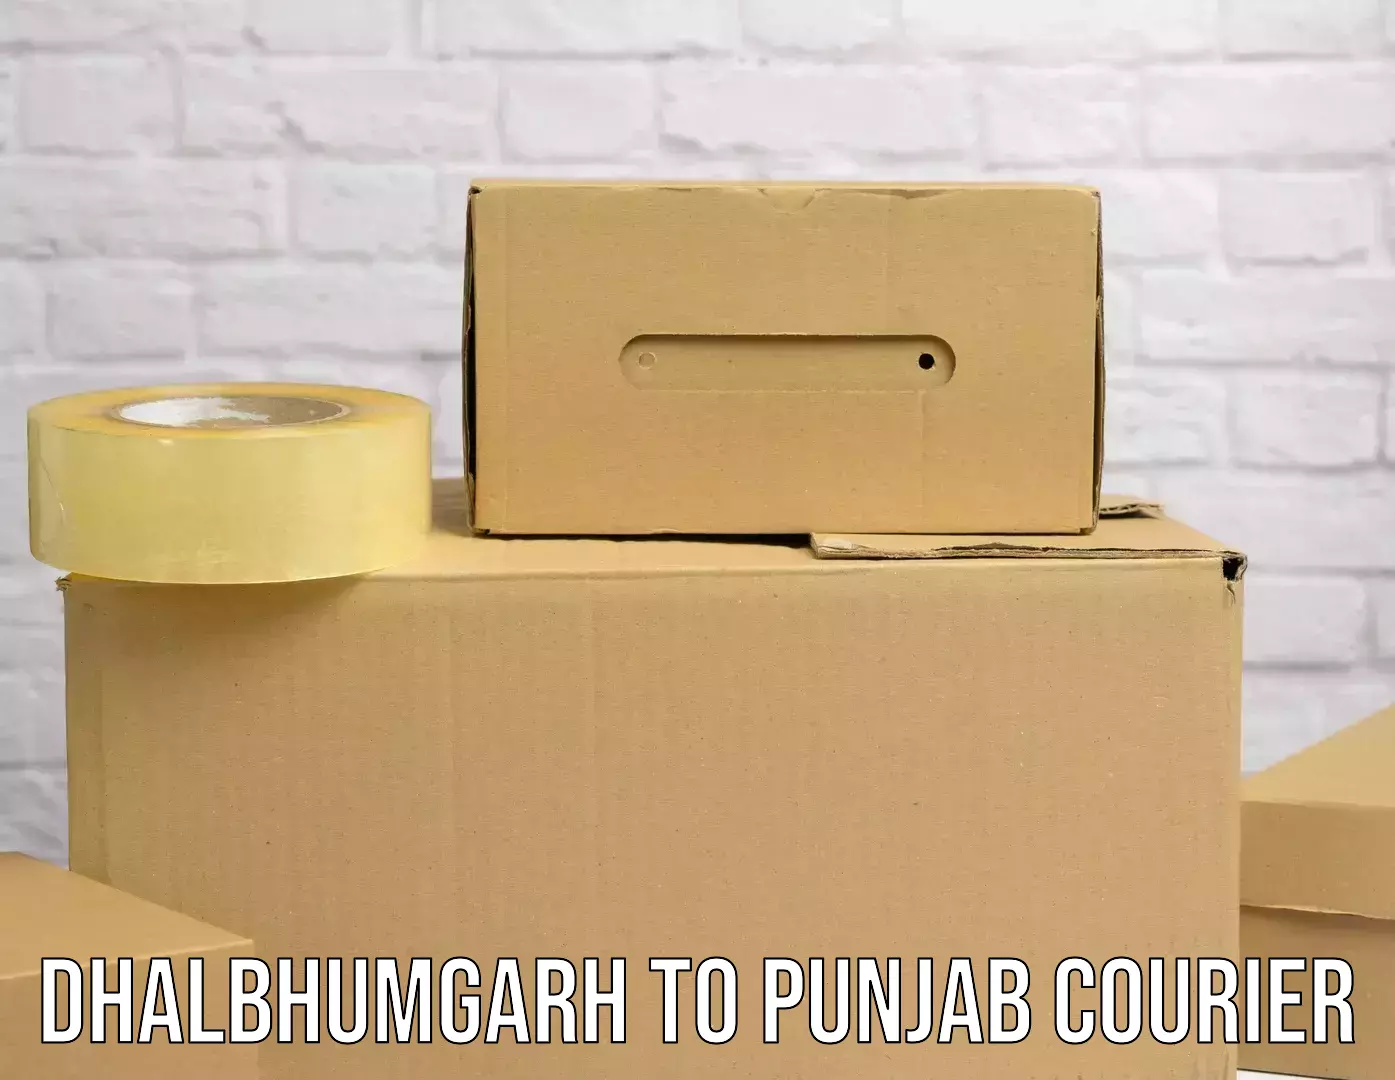 Express package services Dhalbhumgarh to Mohali